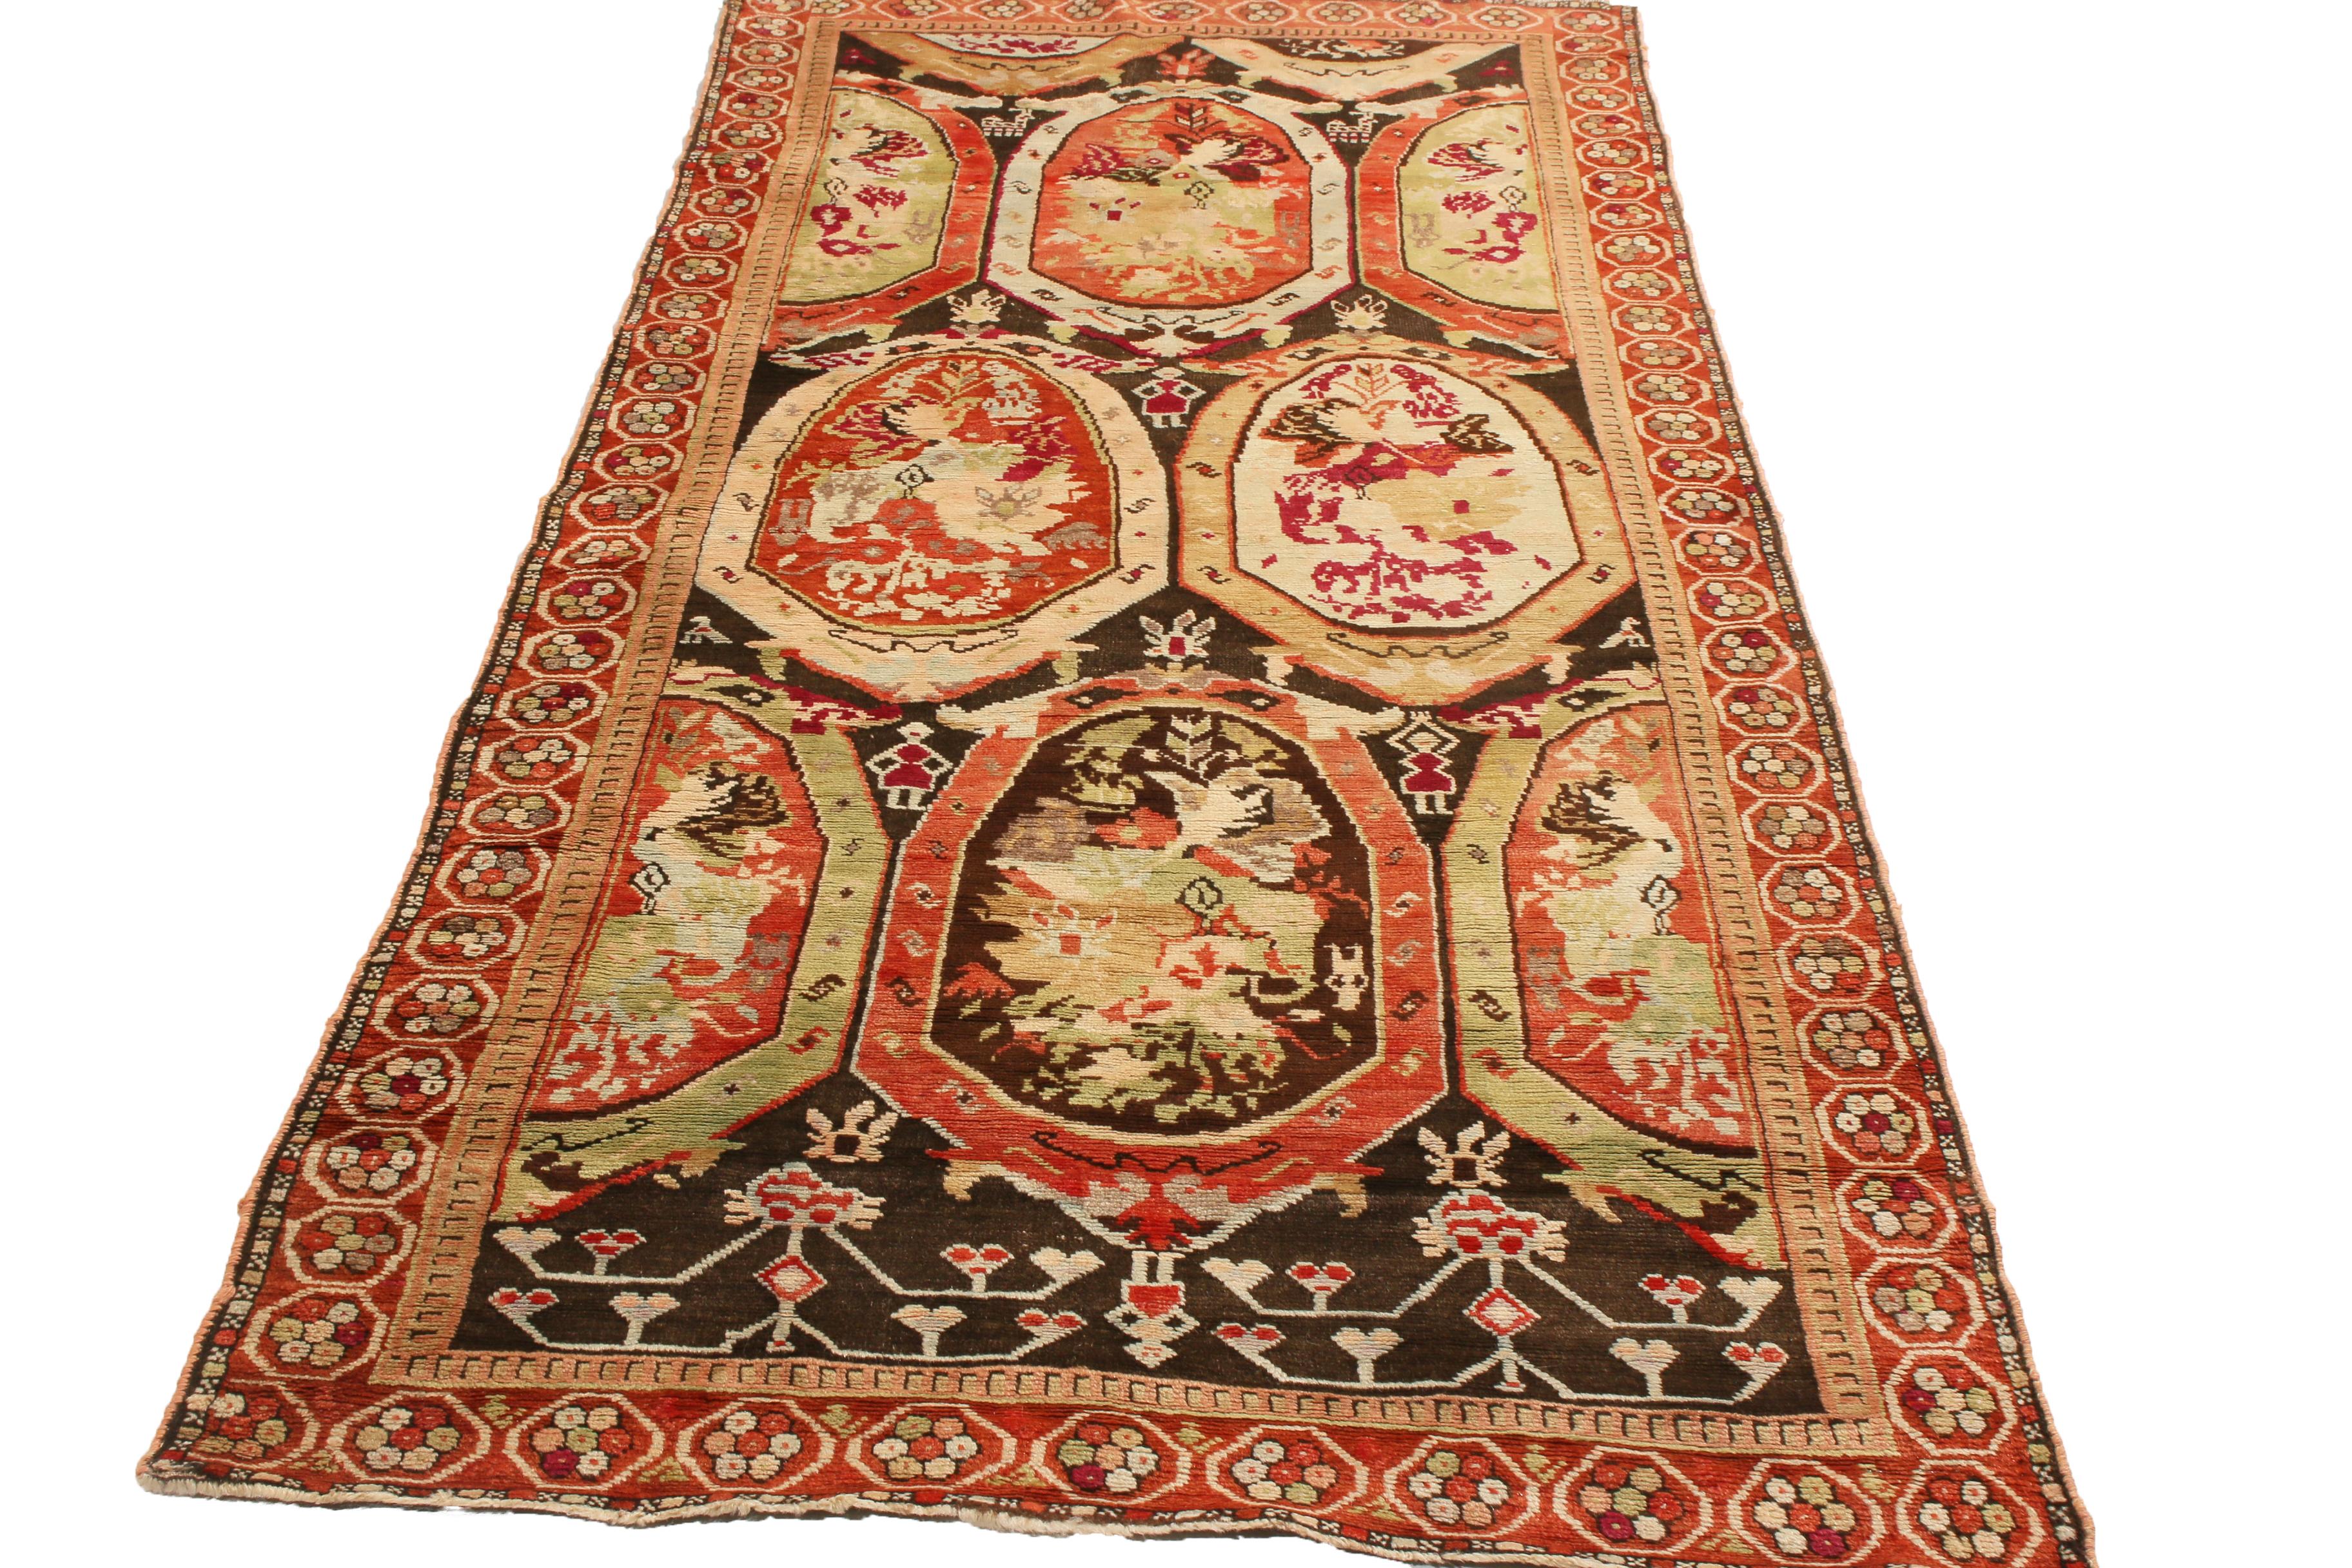 Originating from Russia between 1880-1900, this vintage Karabagh runner enjoys both tribal geometric and European floral influences in this all over field design. Hand knotted in high quality wool, the combination of oak brown, beige, and pink